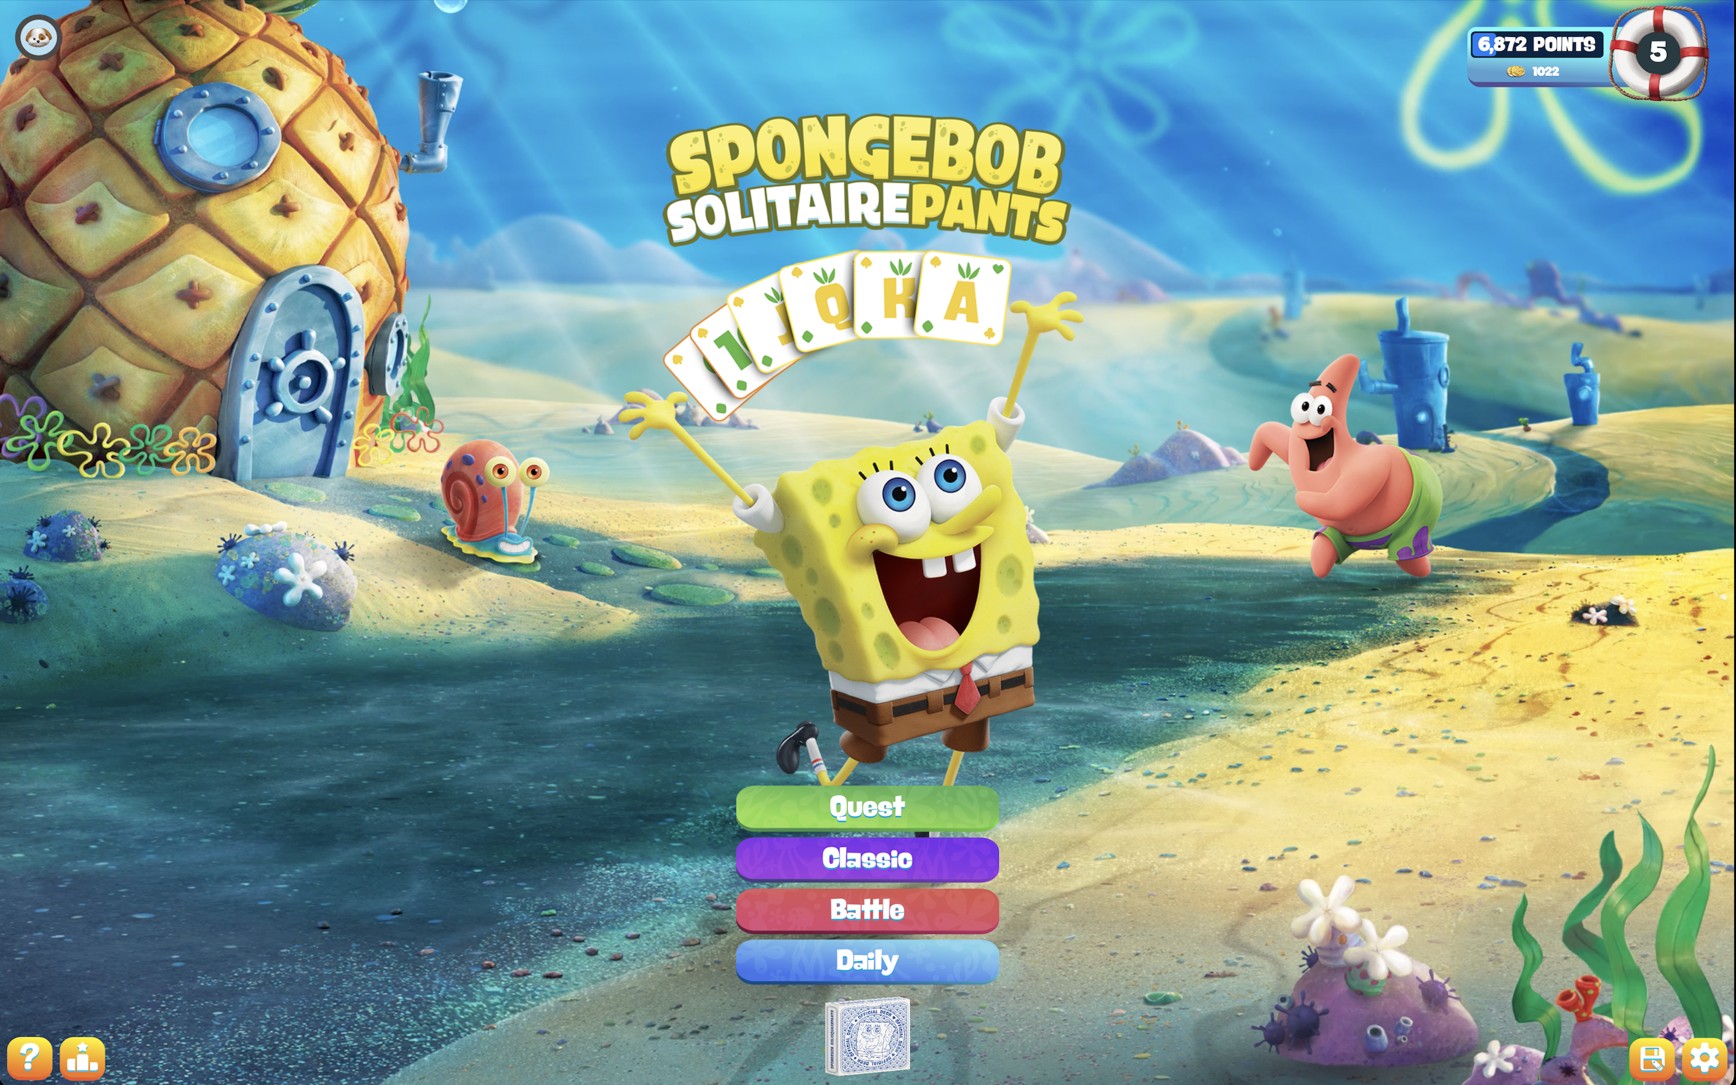 Game 'SpongeBob Solitaire' becomes part of the Apple Arcade catalog
